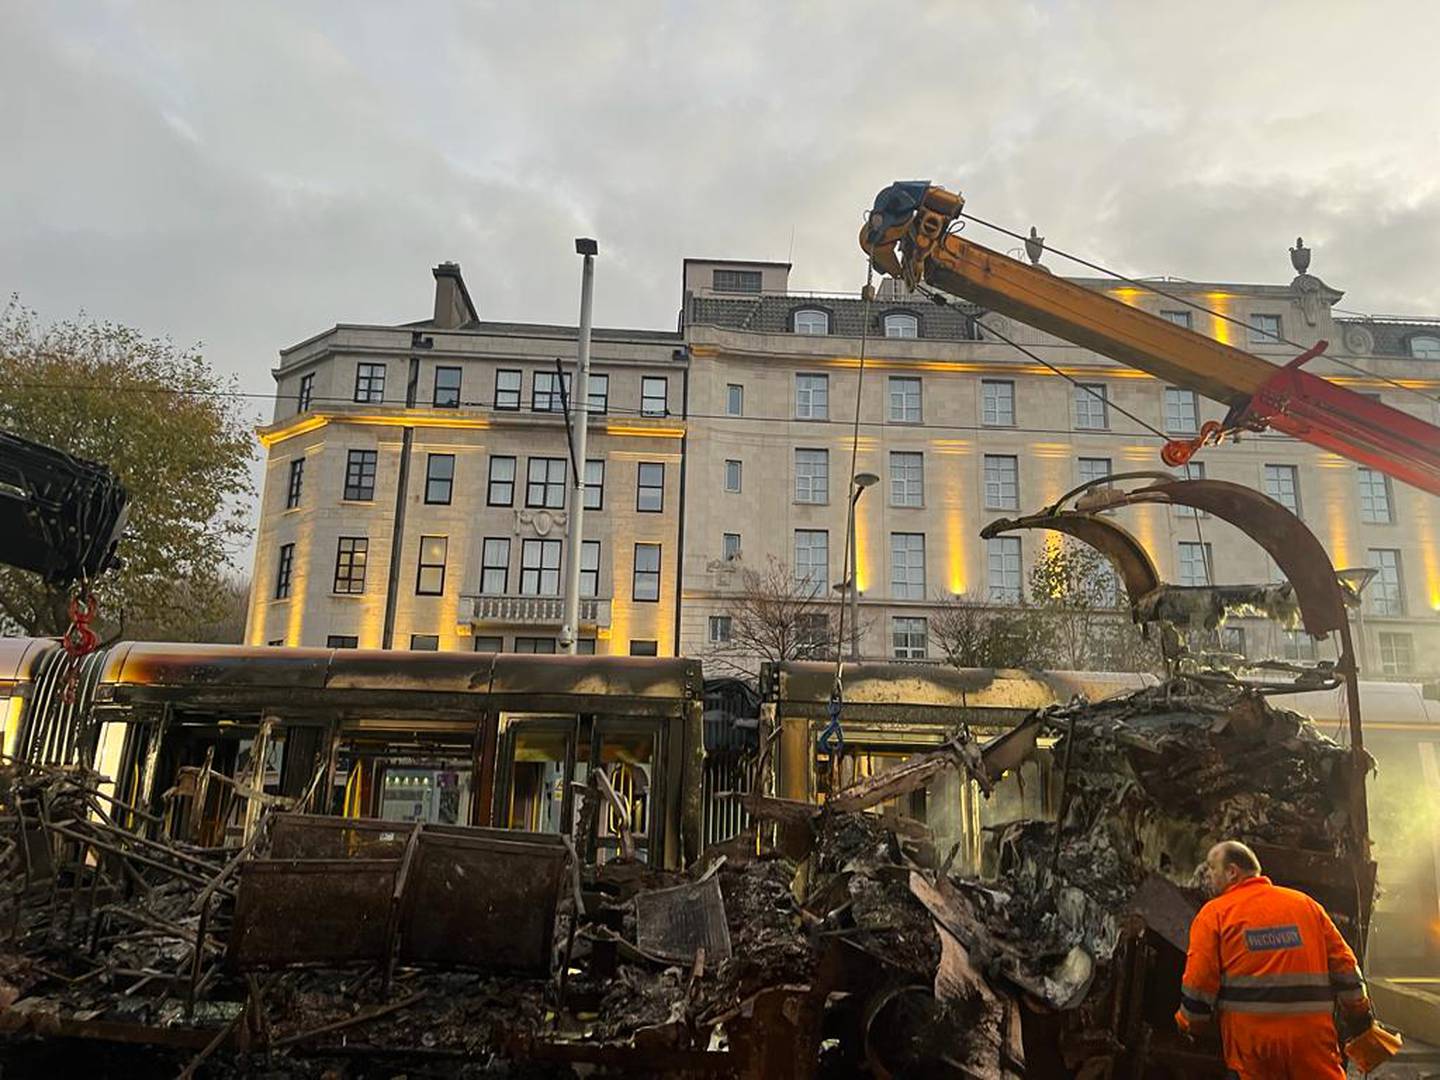 Burned out vehicles and a Luas in Dublin city centre on Friday morning after rioting in the capital on Thursday night. Photograph: Conor Pope